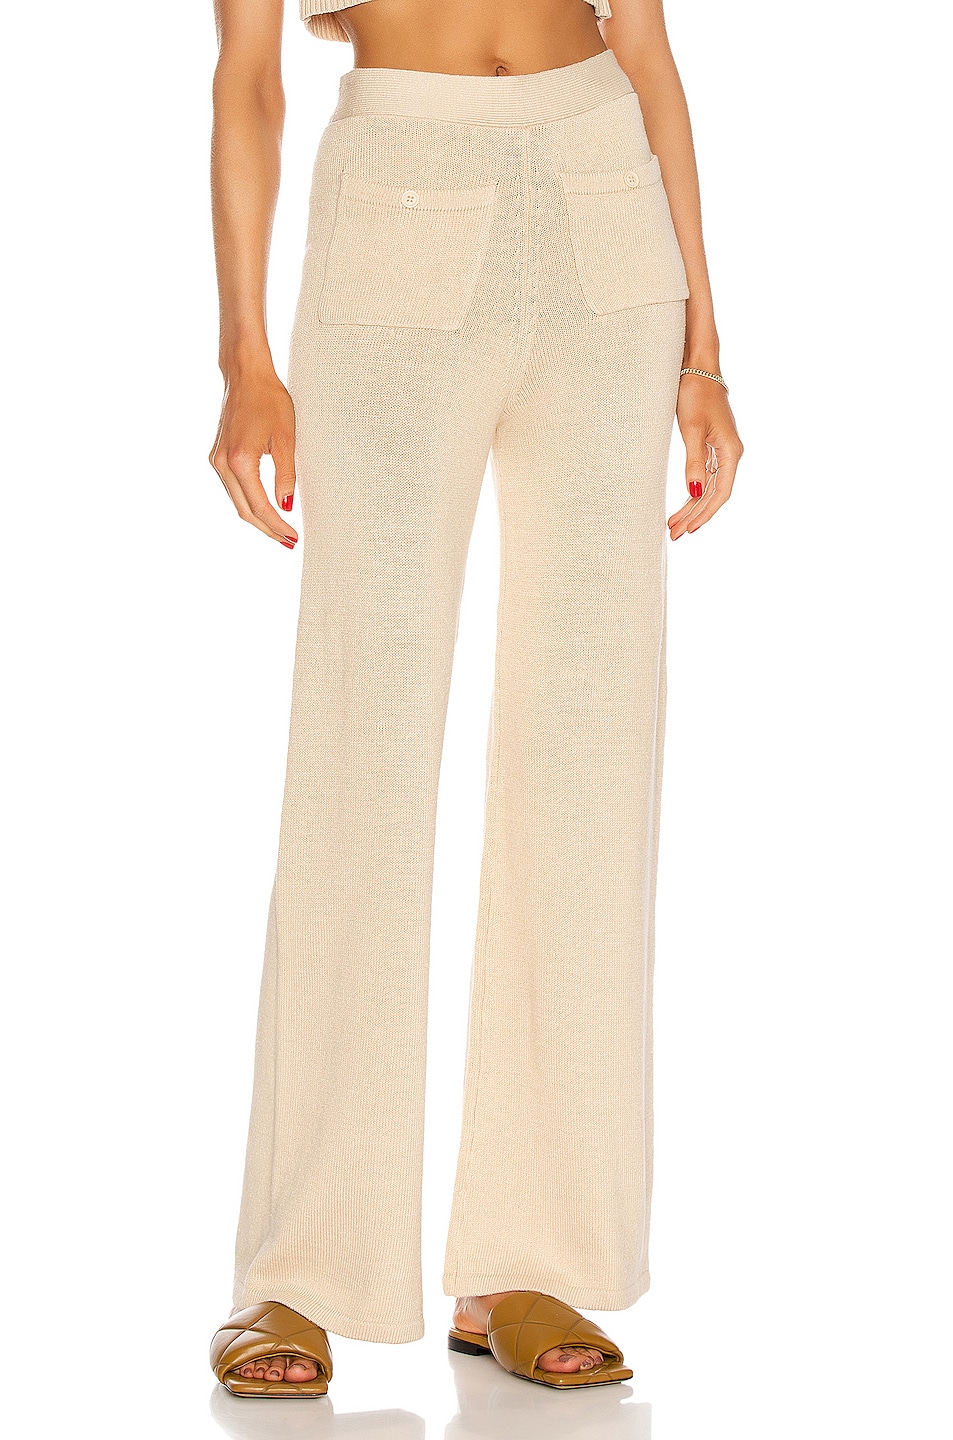 Image 1 of JoosTricot Solid Linen Pant in Sandstone